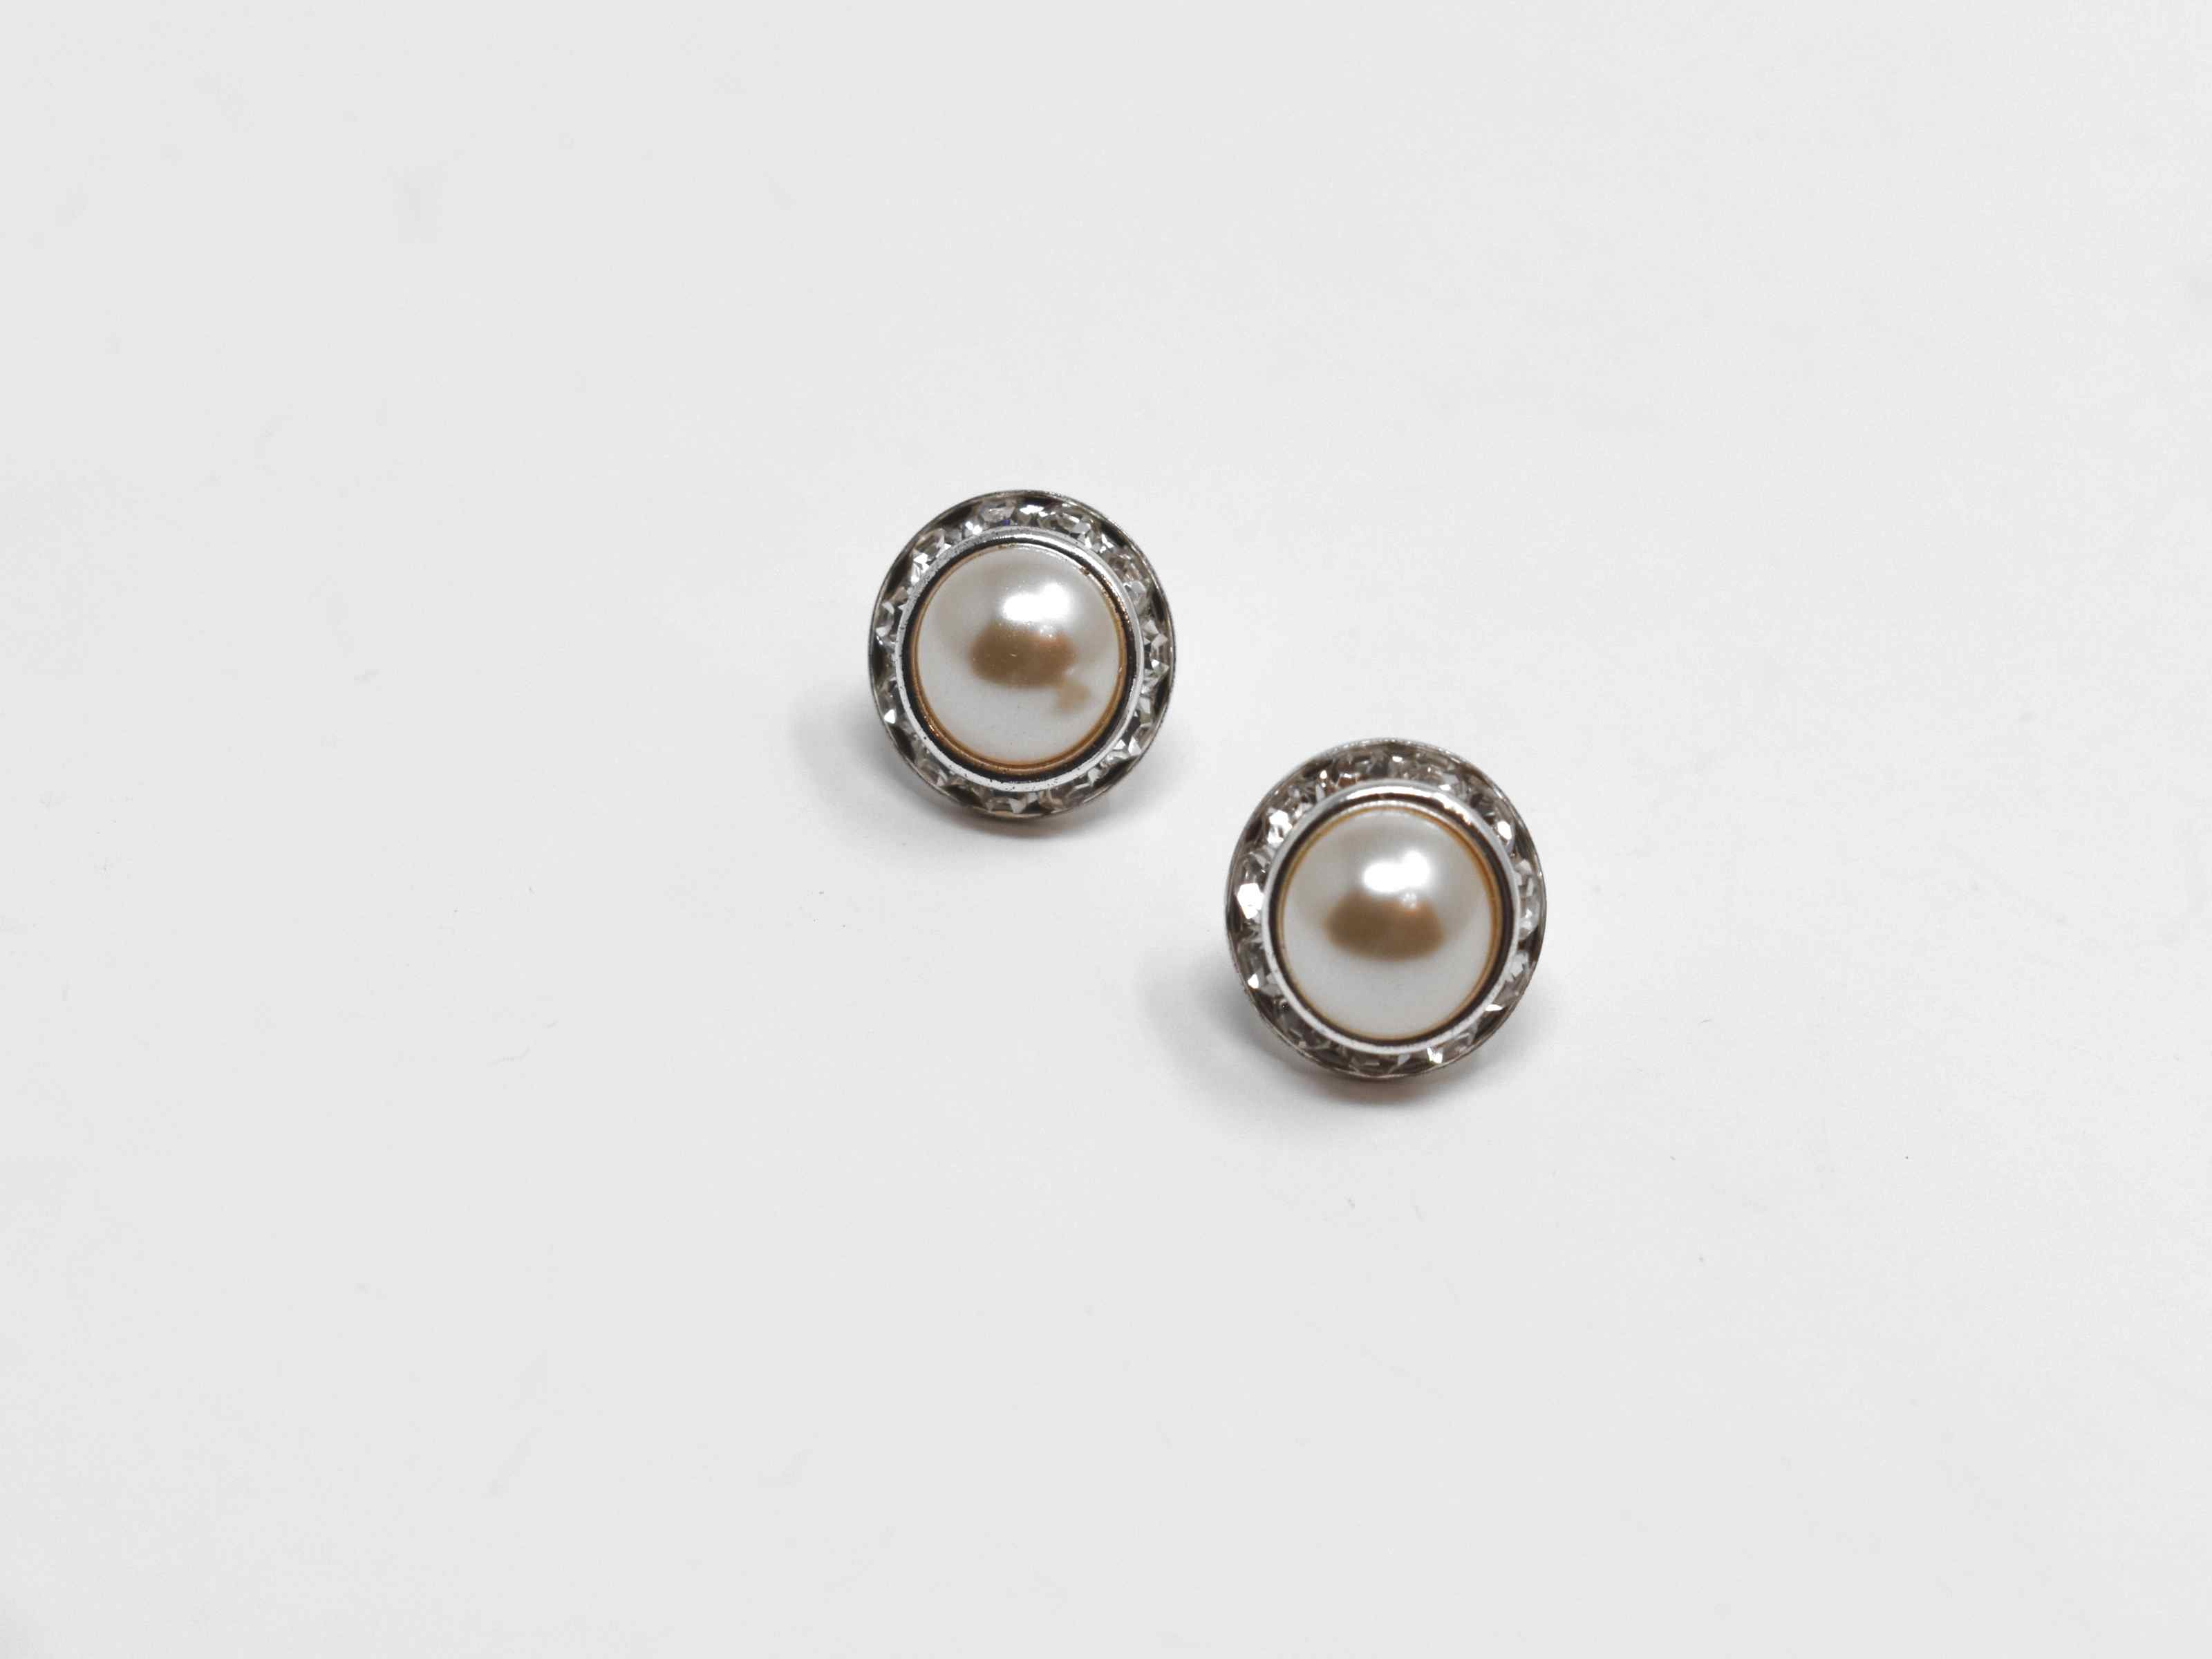 We would love for you to enjoy our delicate but chic calendula pearl knob earrings. These earrings have a champagne center pearl surrounded by a halo of stones. They are a 1/2 inch in length with a push back clasp.